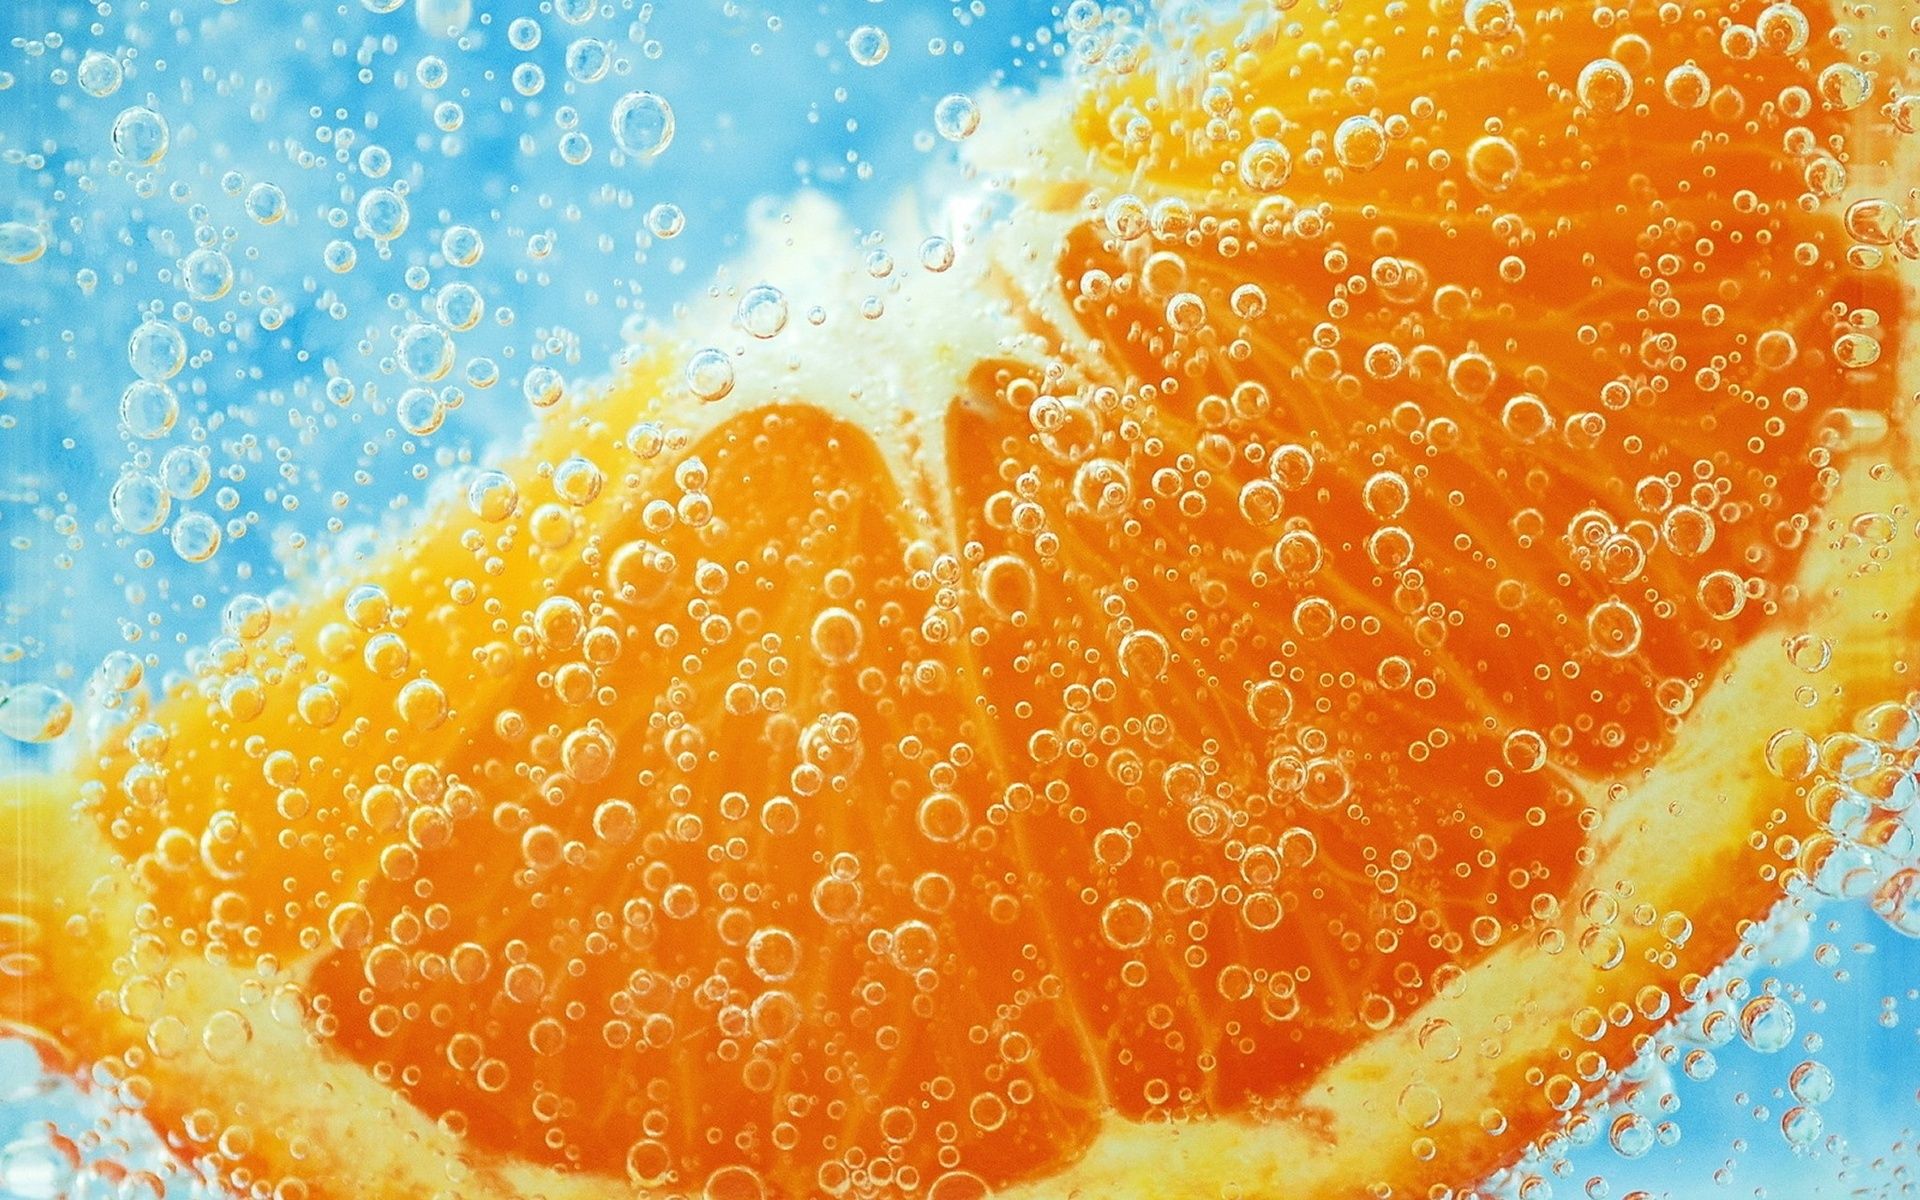 Slice of Orange with Water Bubbles | Macro Photo and Wallpaper | FMP ...